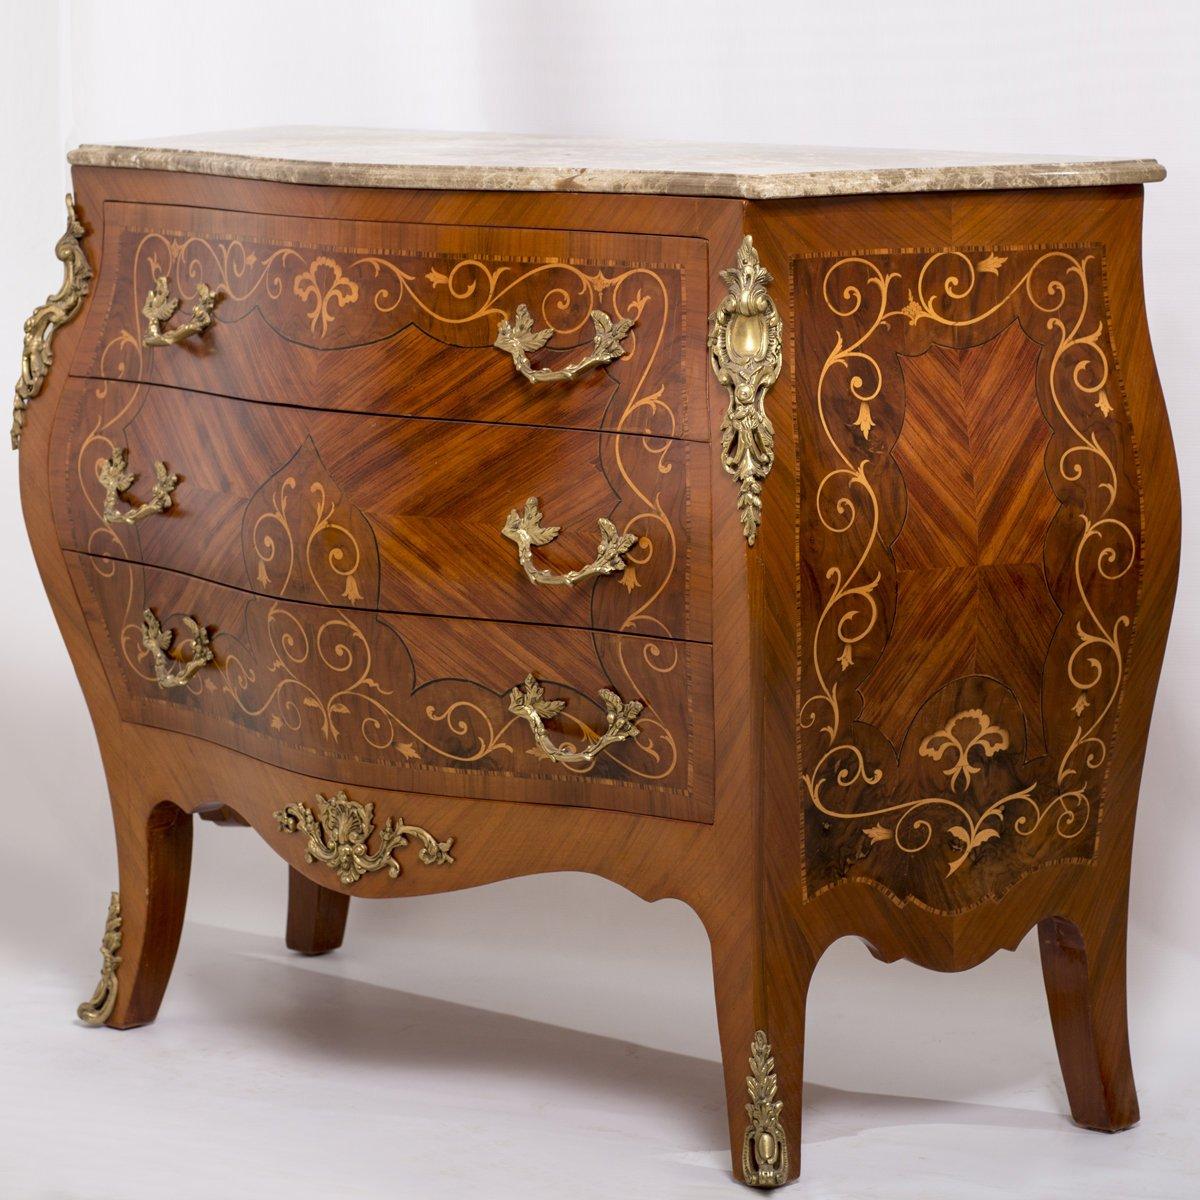 A beautiful Louis XV drawers chest, 20th century. 

The Louis XV handmade drawer chest combines the usefulness and elegance of French furniture characterized by the superior craftsmanship of 18th century cabinet making in France. Fantasy played an